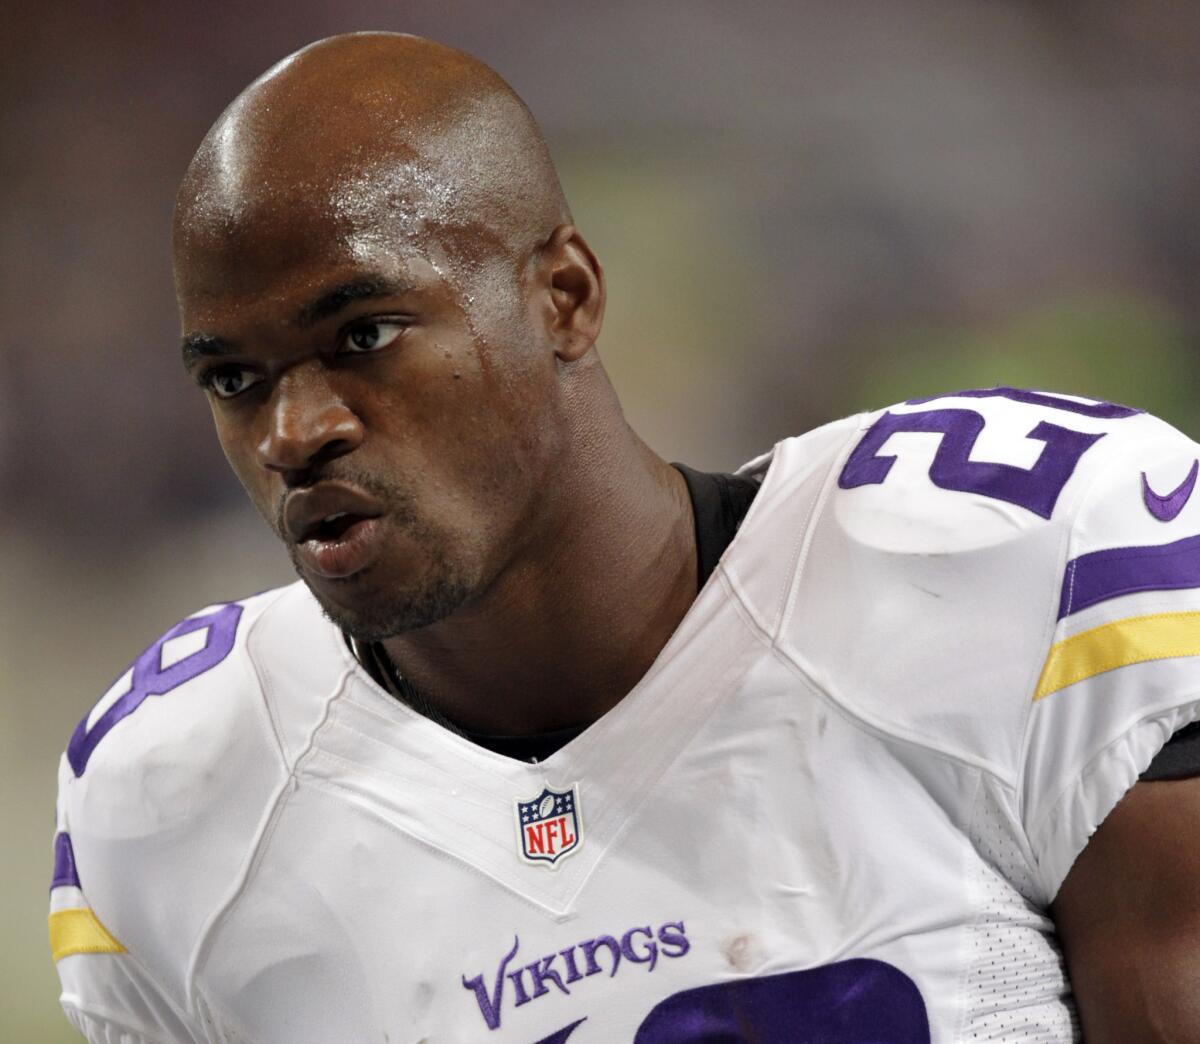 Minnesota running back Adrian Peterson is under contract with the Vikings for three more years, but his agent says he wants out now.